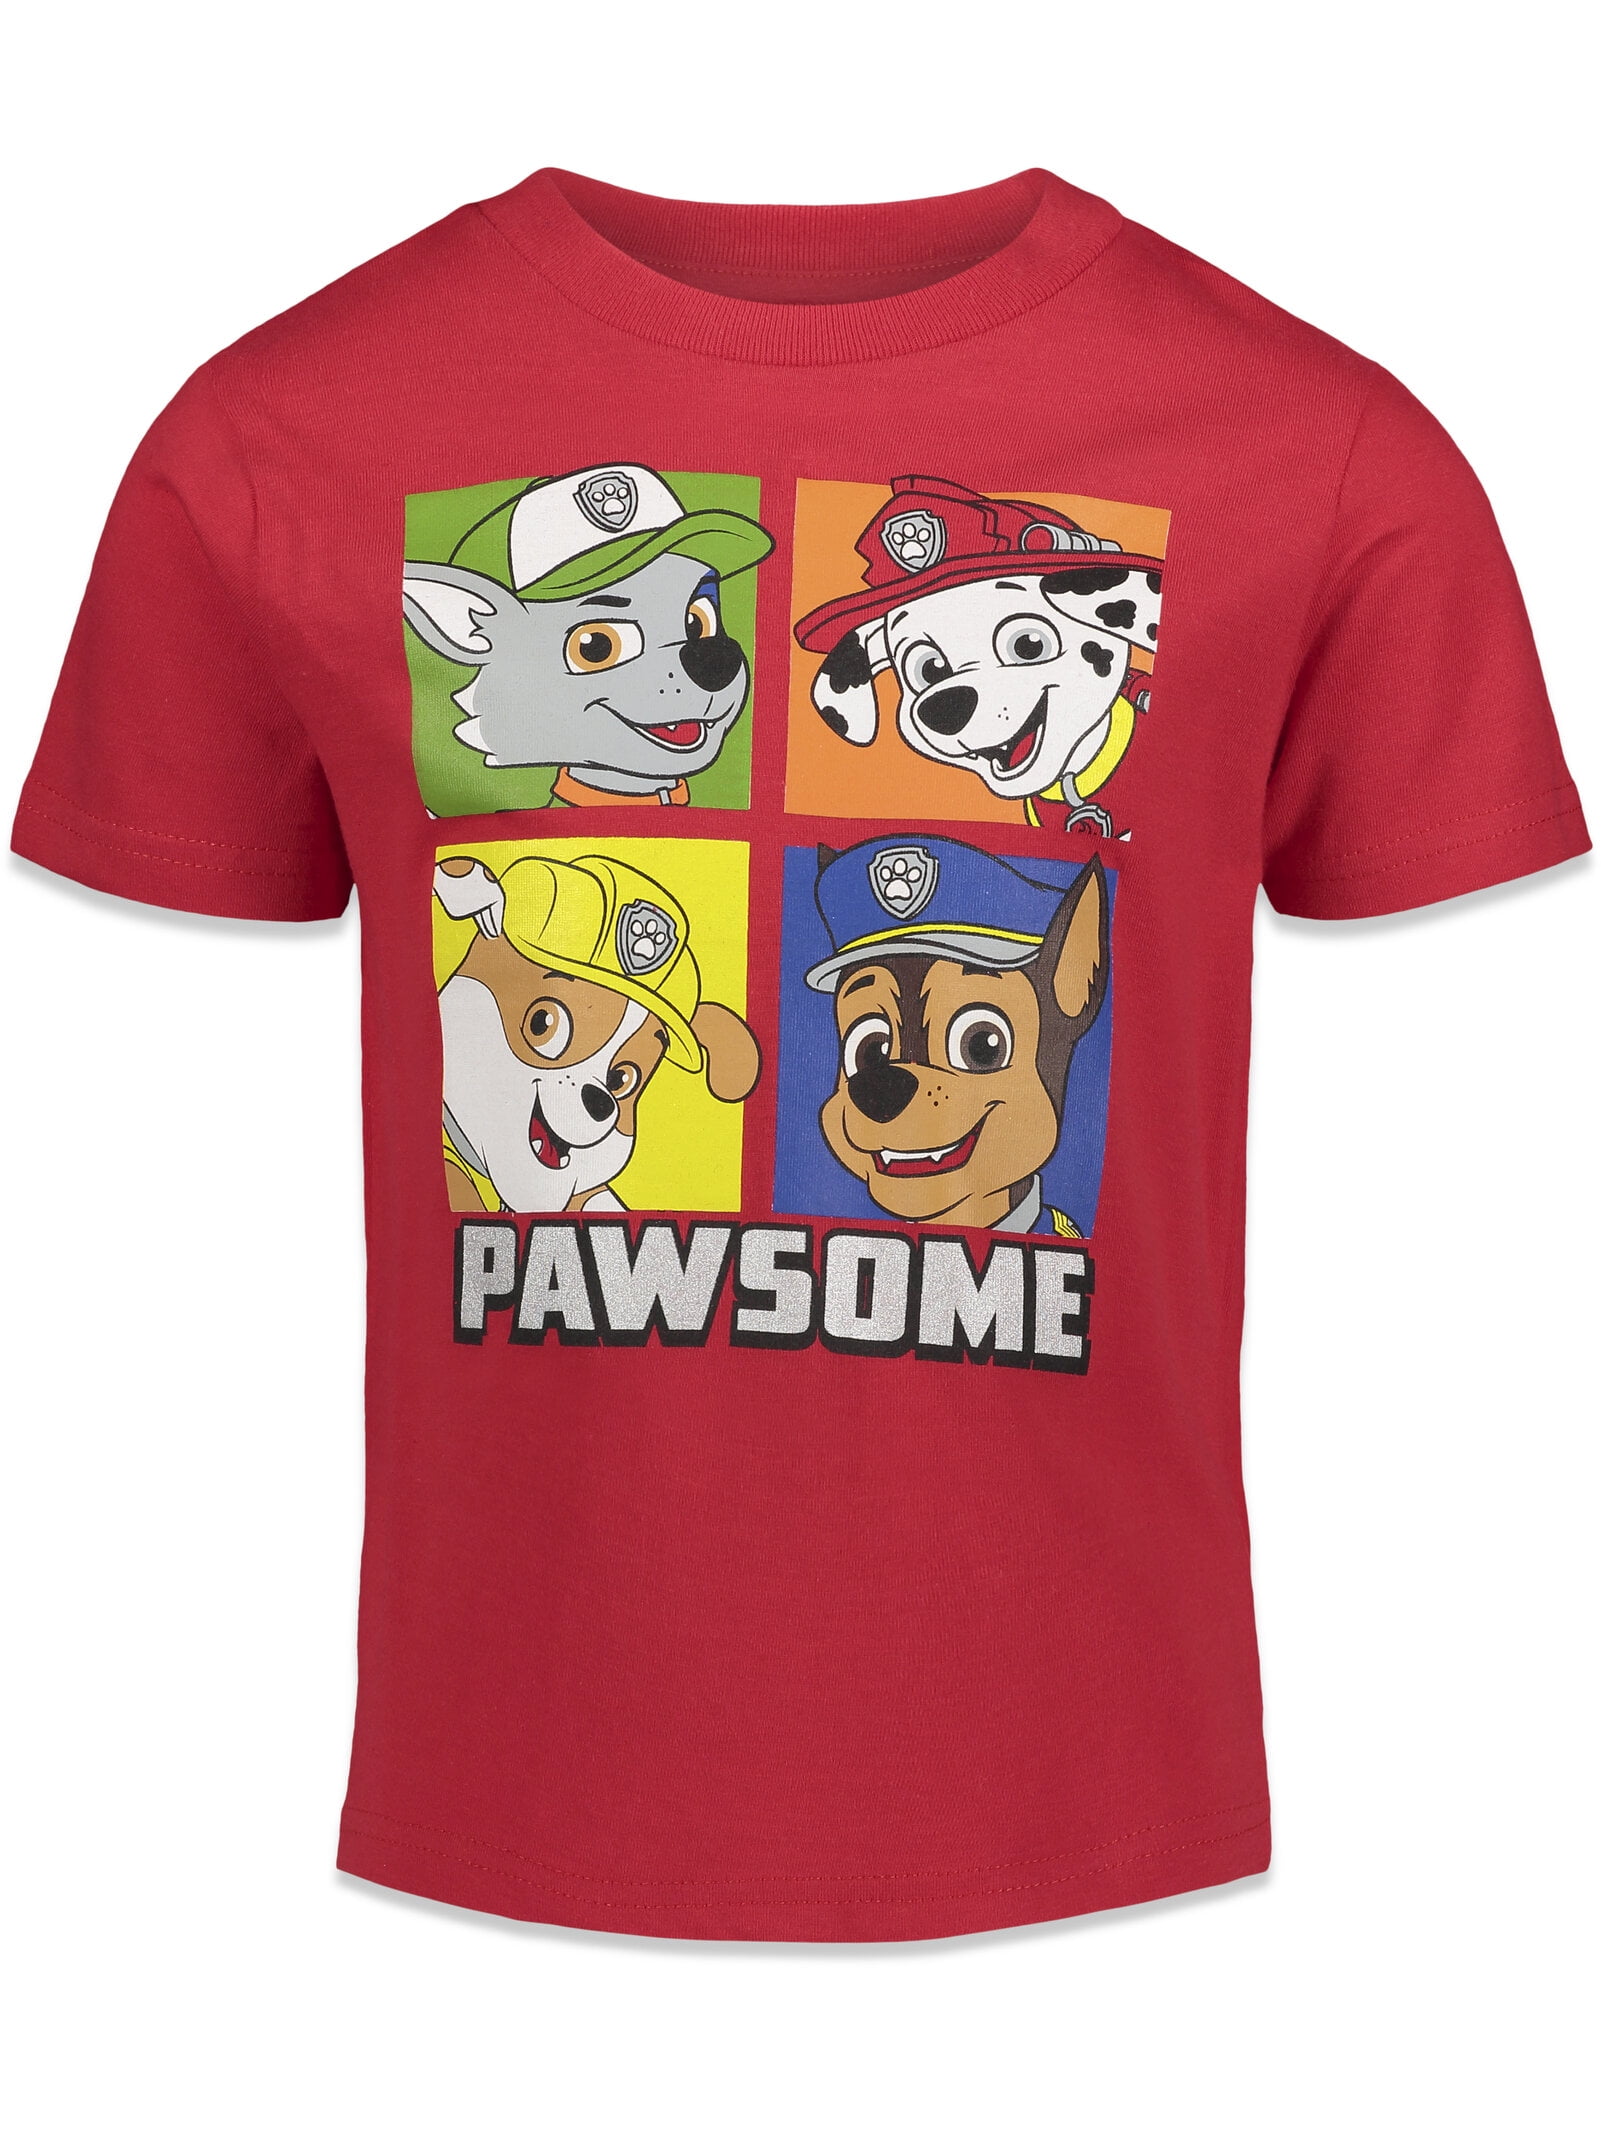 4 Patrol Big Pack T-Shirts Rubble Paw Toddler Marshall to Chase Kid